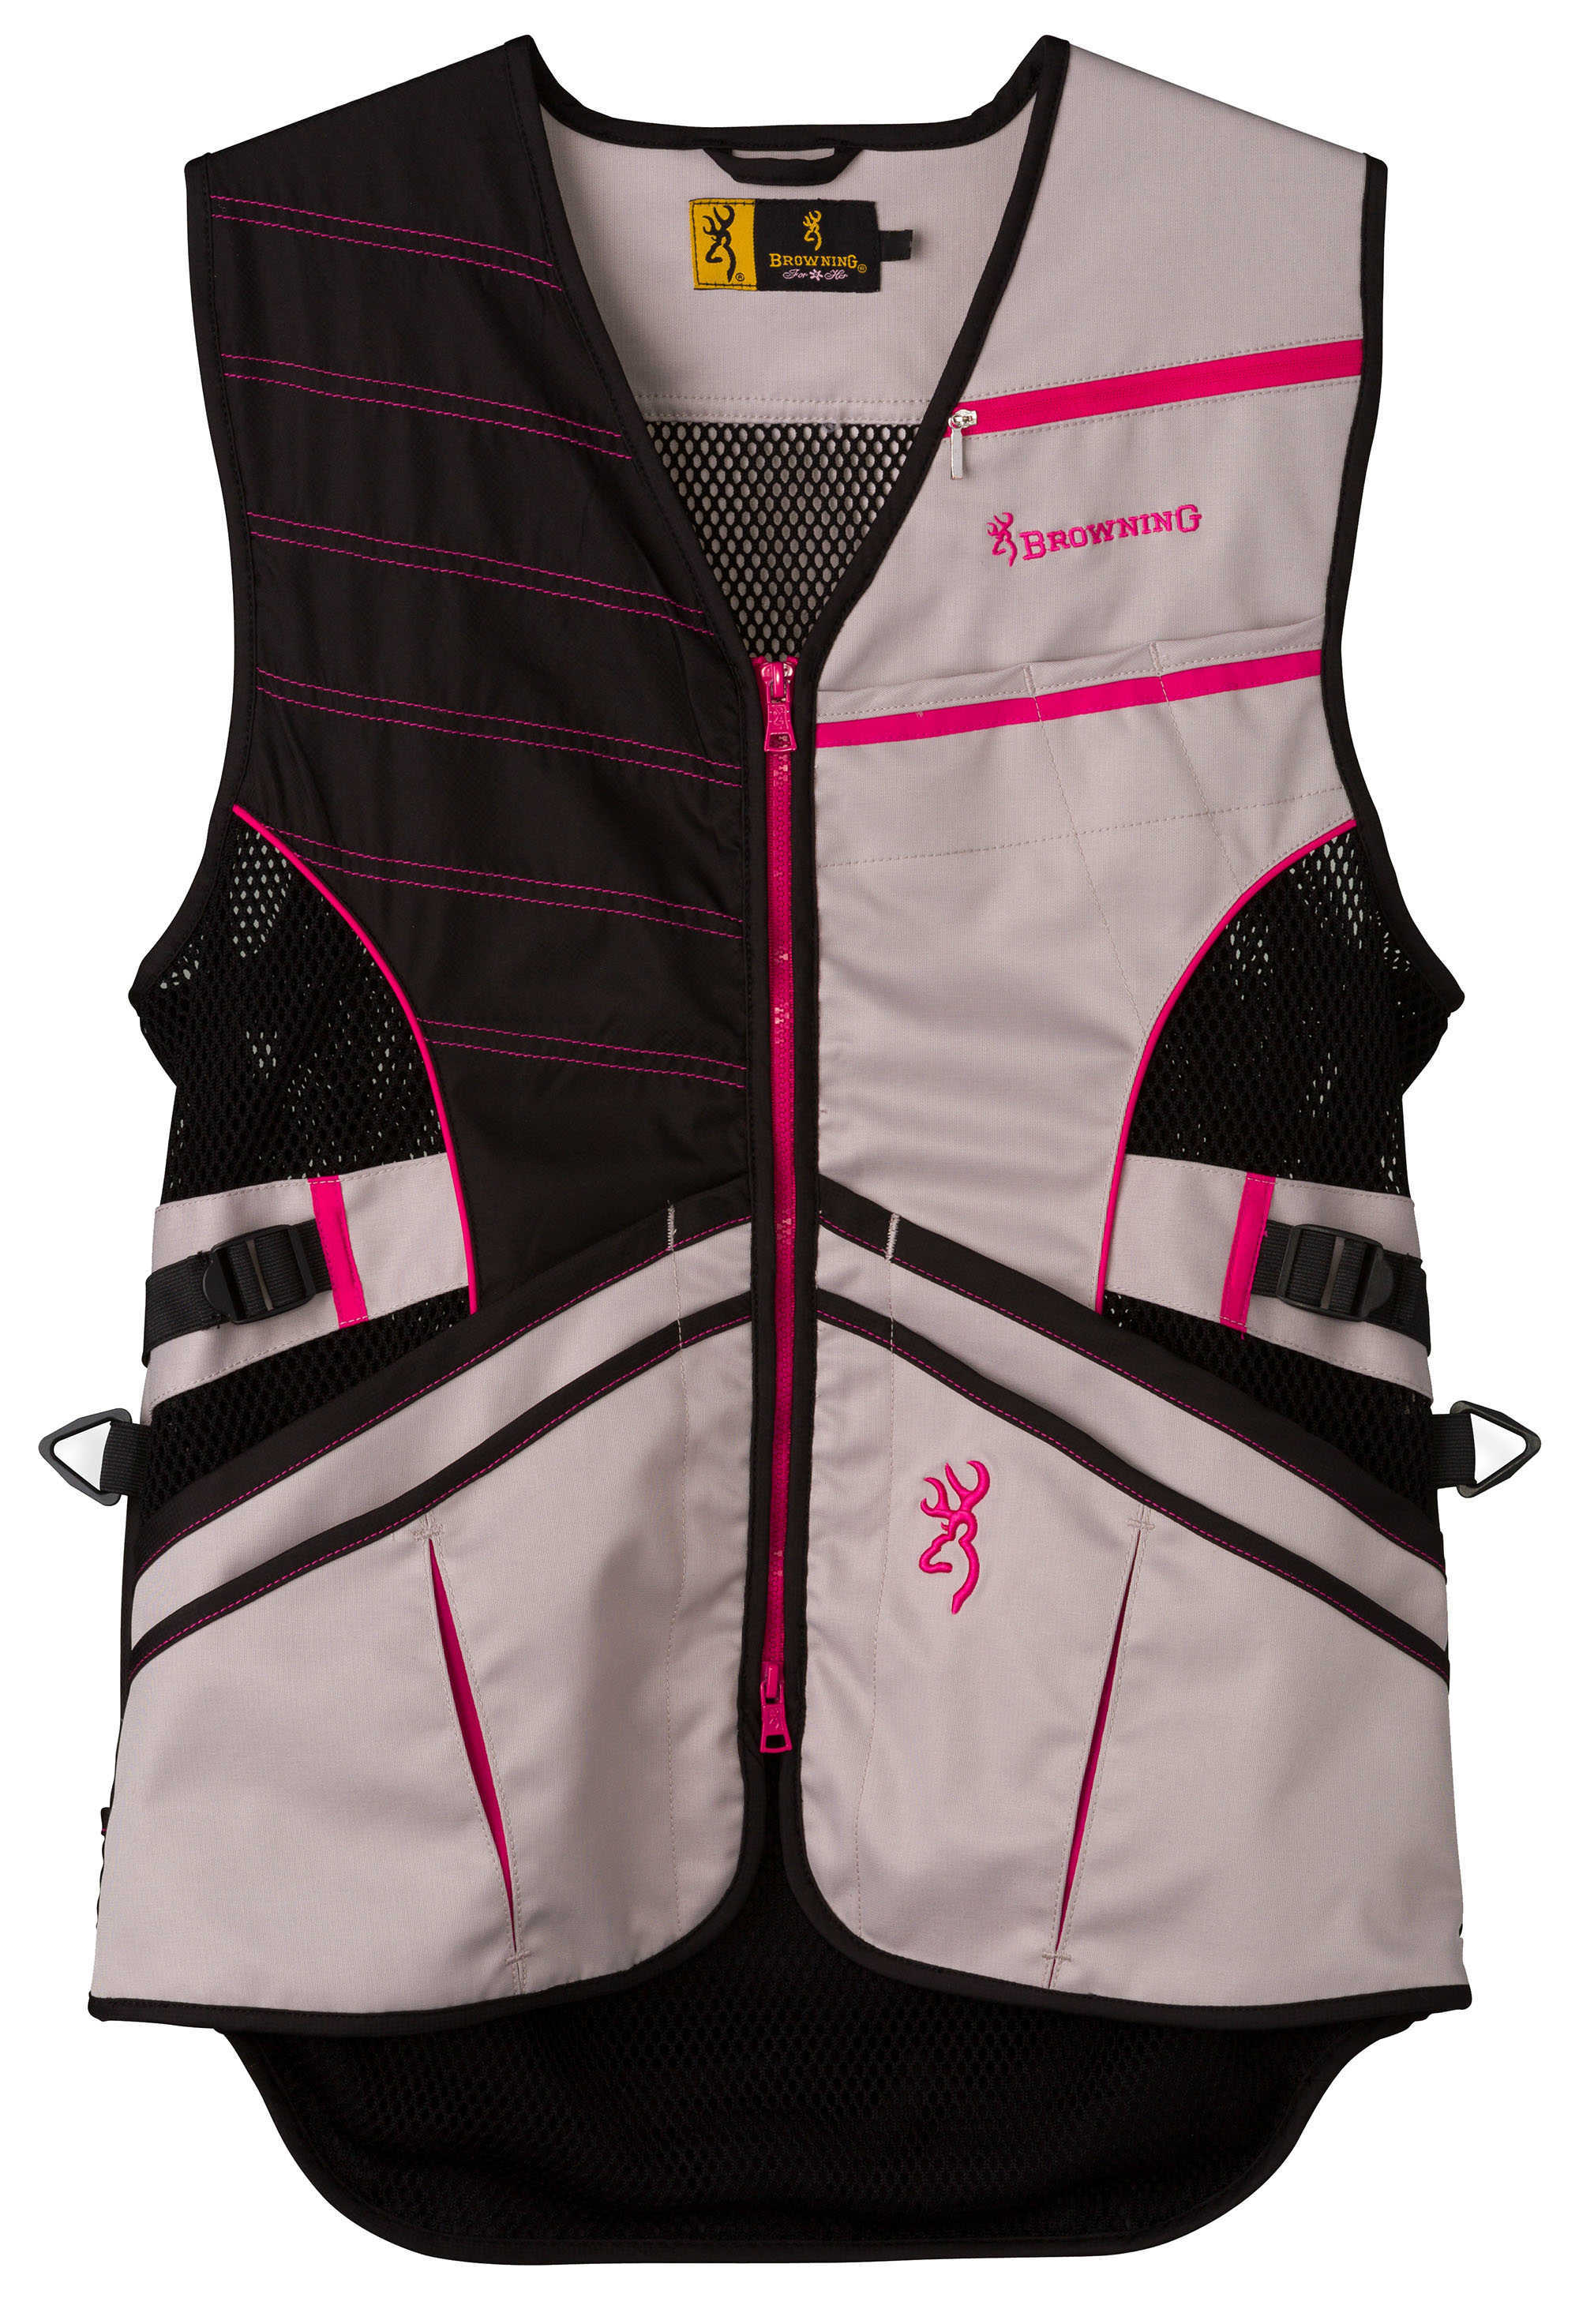 Browning Ace Shooting Vest Hot Pink, Large Md: 3050727703